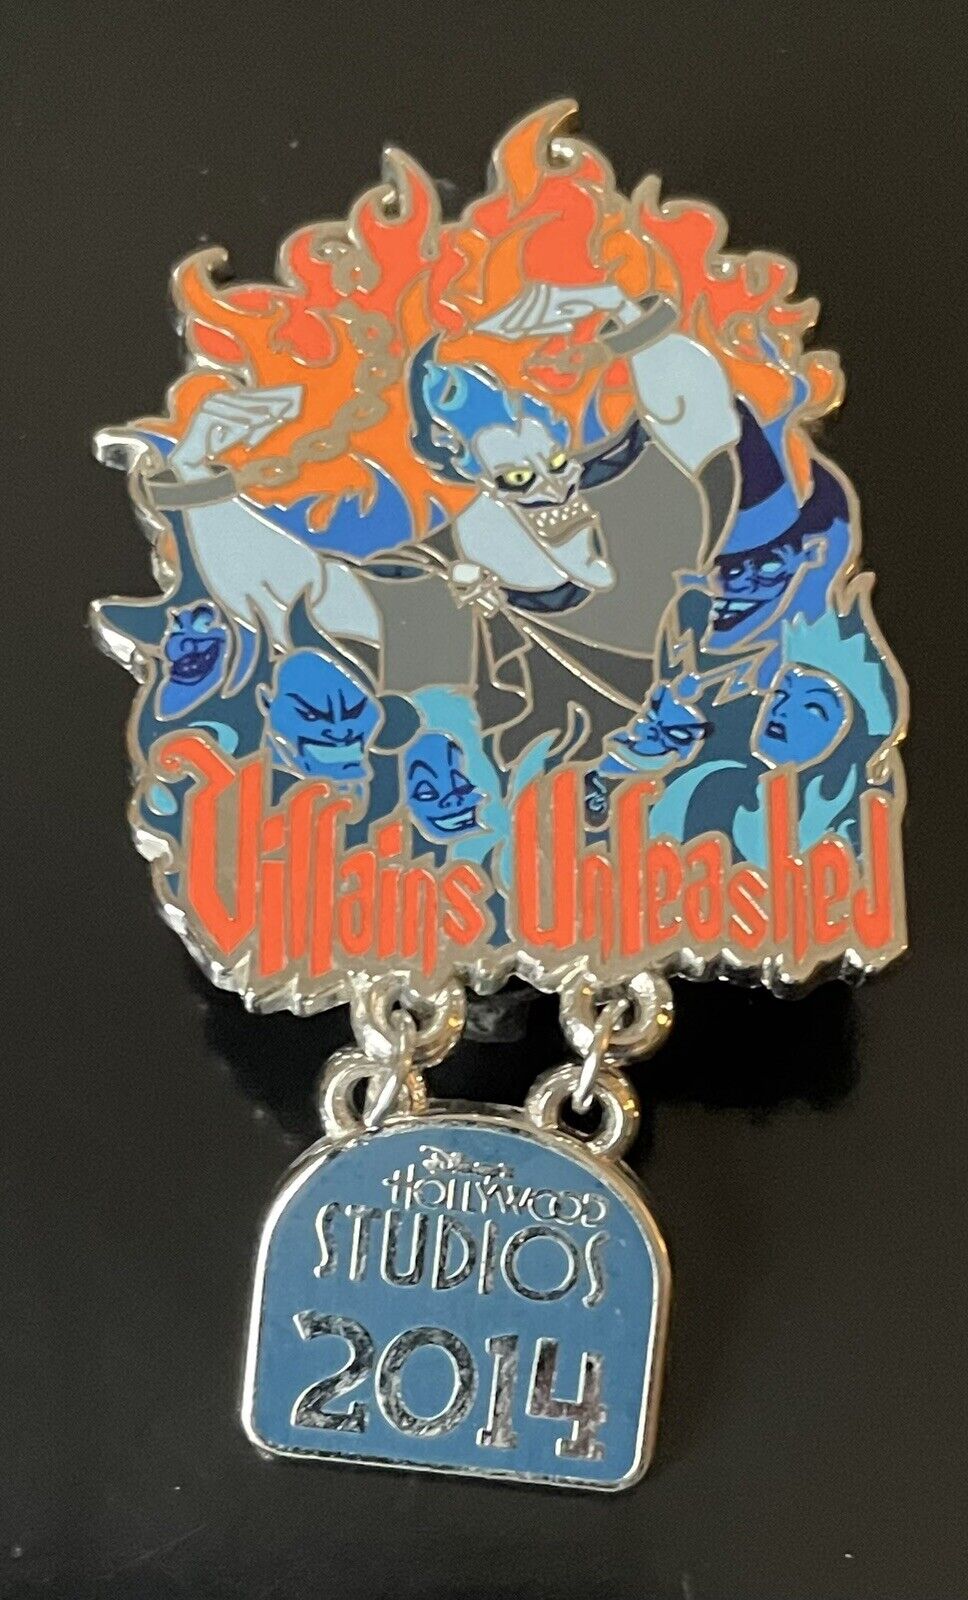 DISNEY 2014 VILLAINS UNLEASHED HOLLYWOOD STUDIOS EVENT PIN EXTREMELY RARE HADES